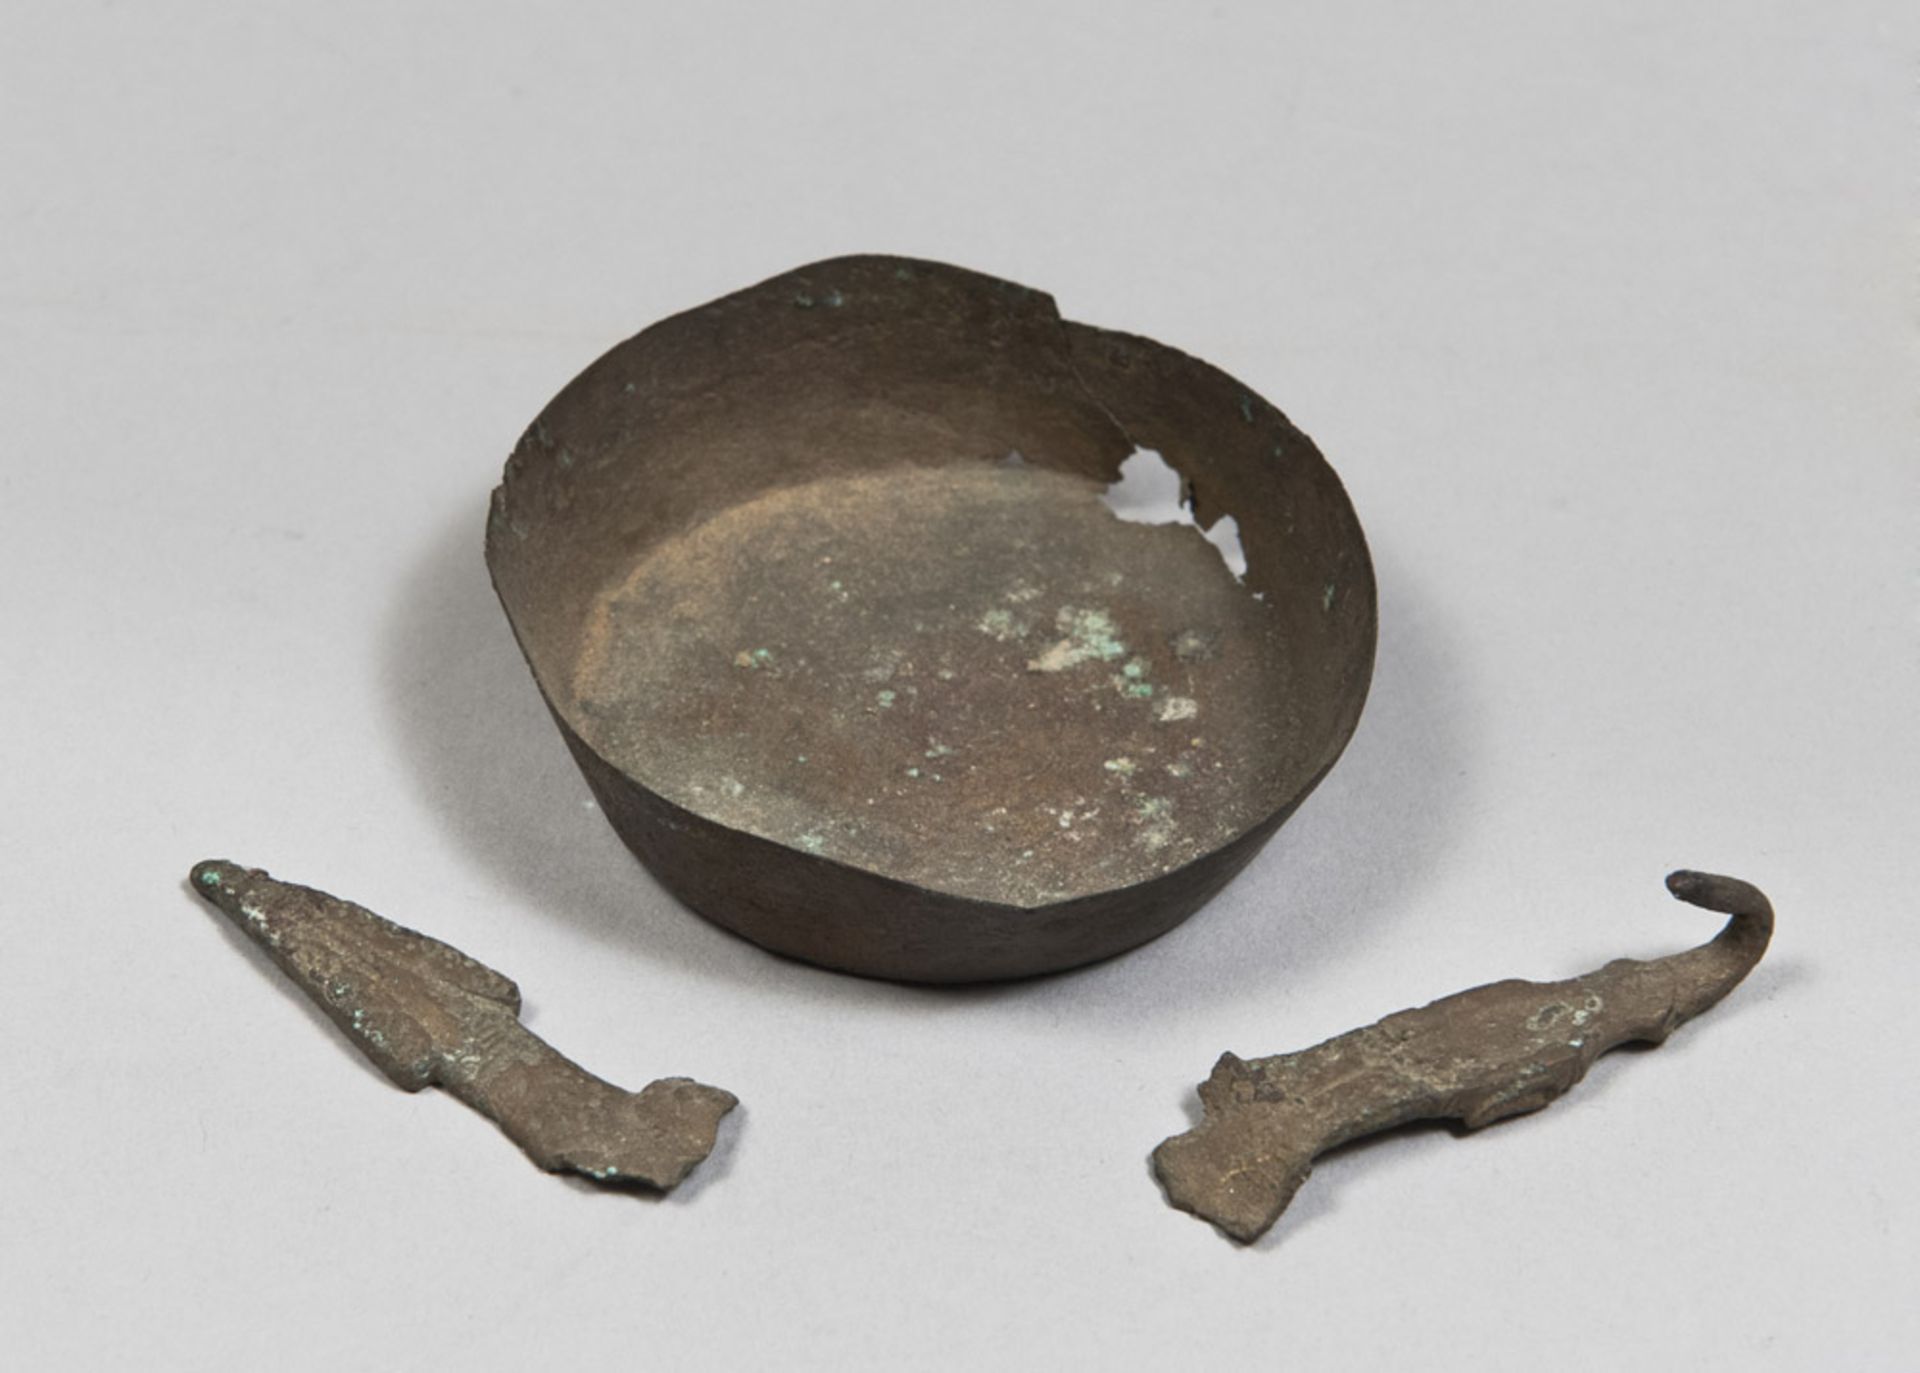 ONE BOWL AND TWO OBJECTS IN BRONZE, 3rd-1st CENTURY A.C. consisting of a small bronze bowl, a buckle